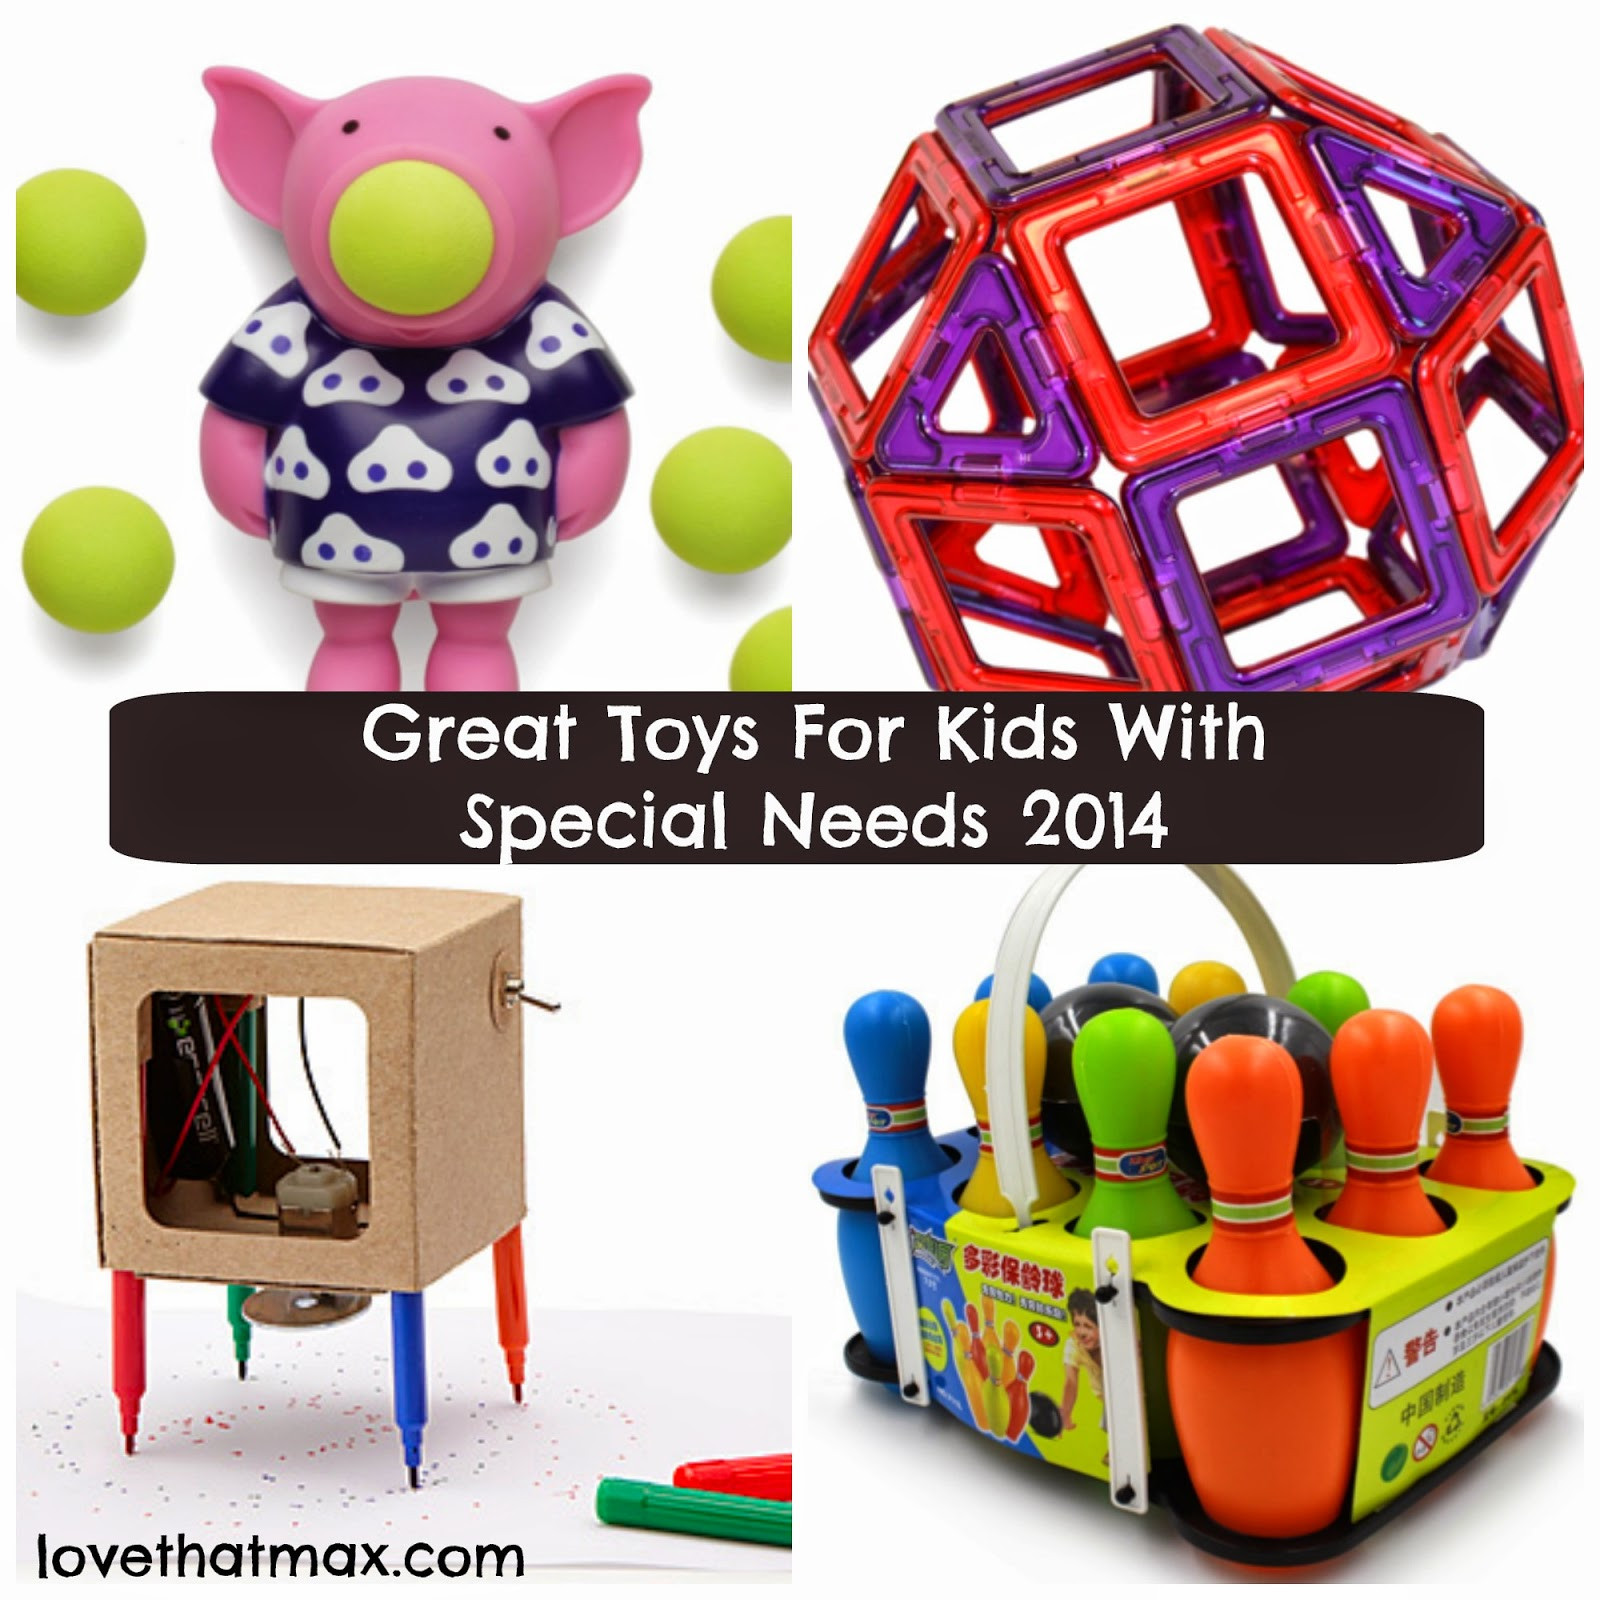 Gifts For Kids With Disabilities
 Love That Max Holiday Gifts And Toys For Kids With